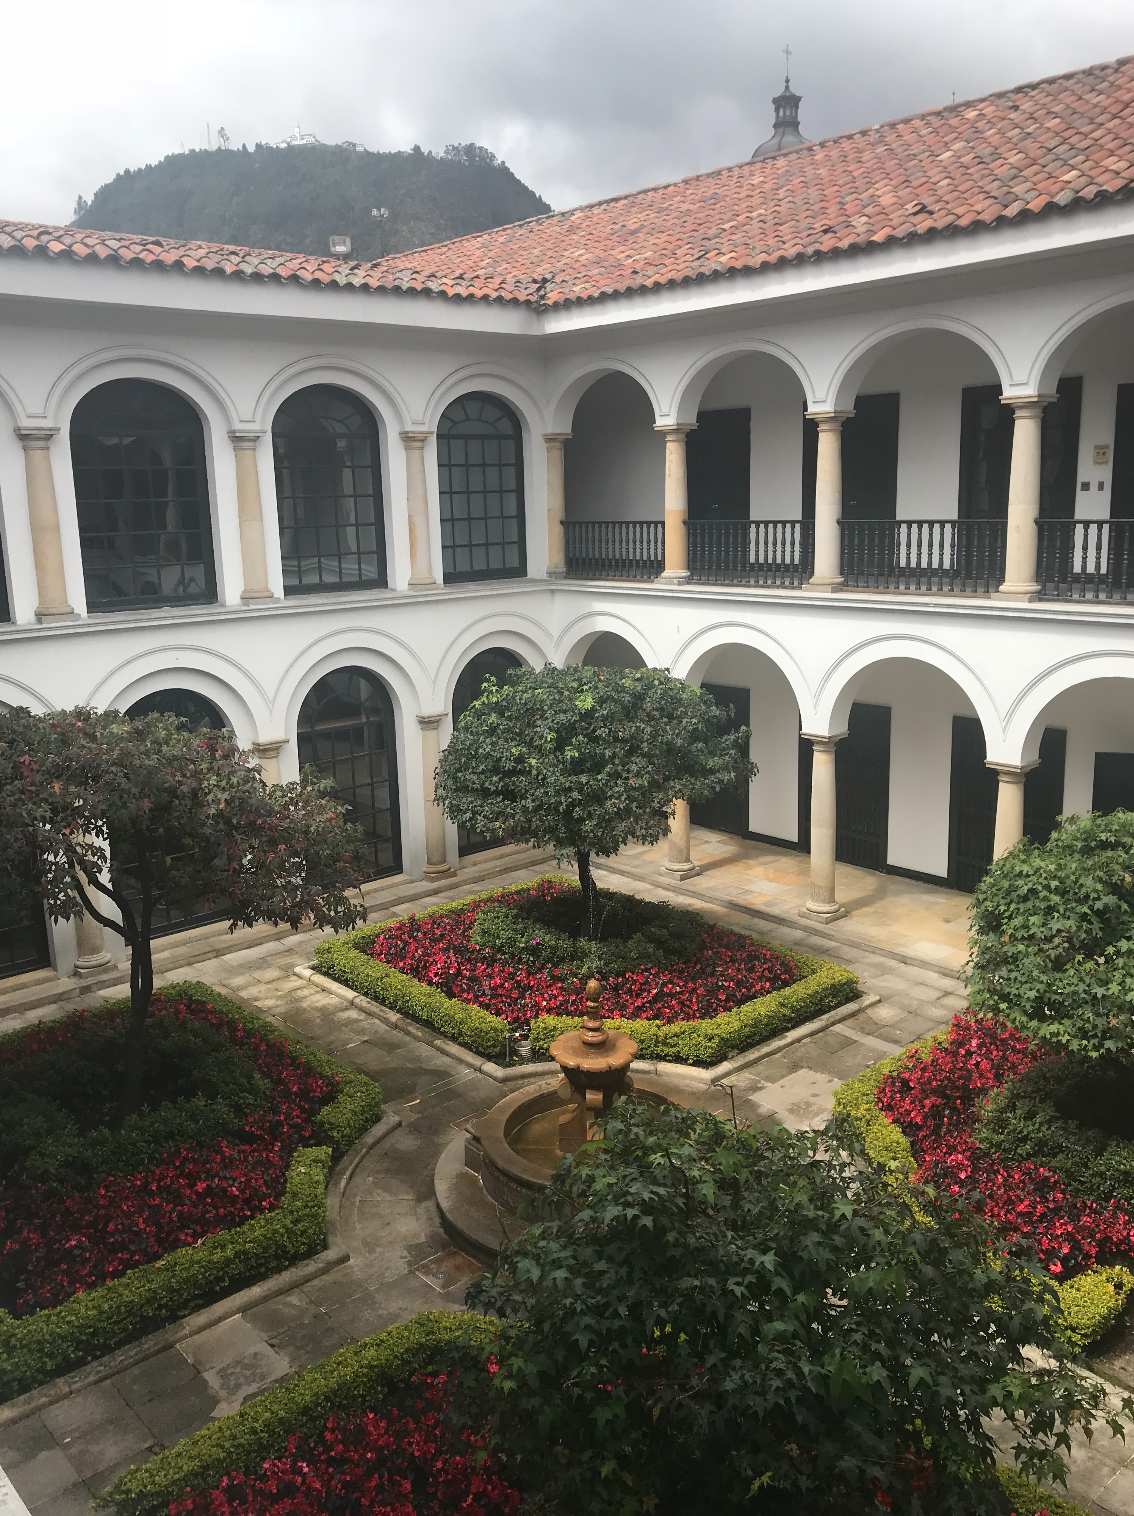 Museo de Botero courtyard best of colombia's museum exhibits